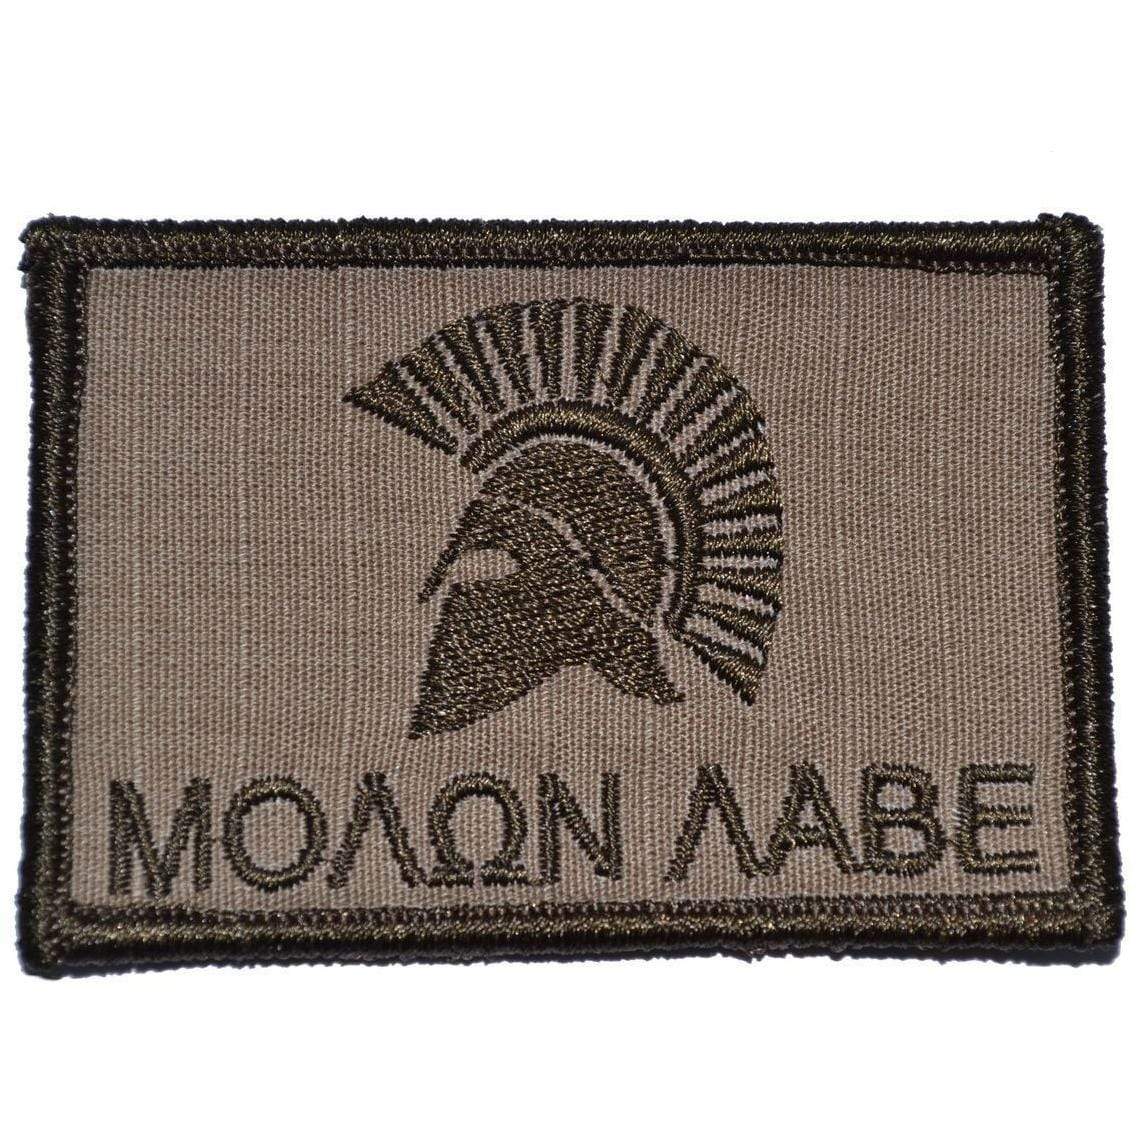 Tactical Gear Junkie Patches Coyote Brown Molon Labe Spartan Head - 2x3 Patch